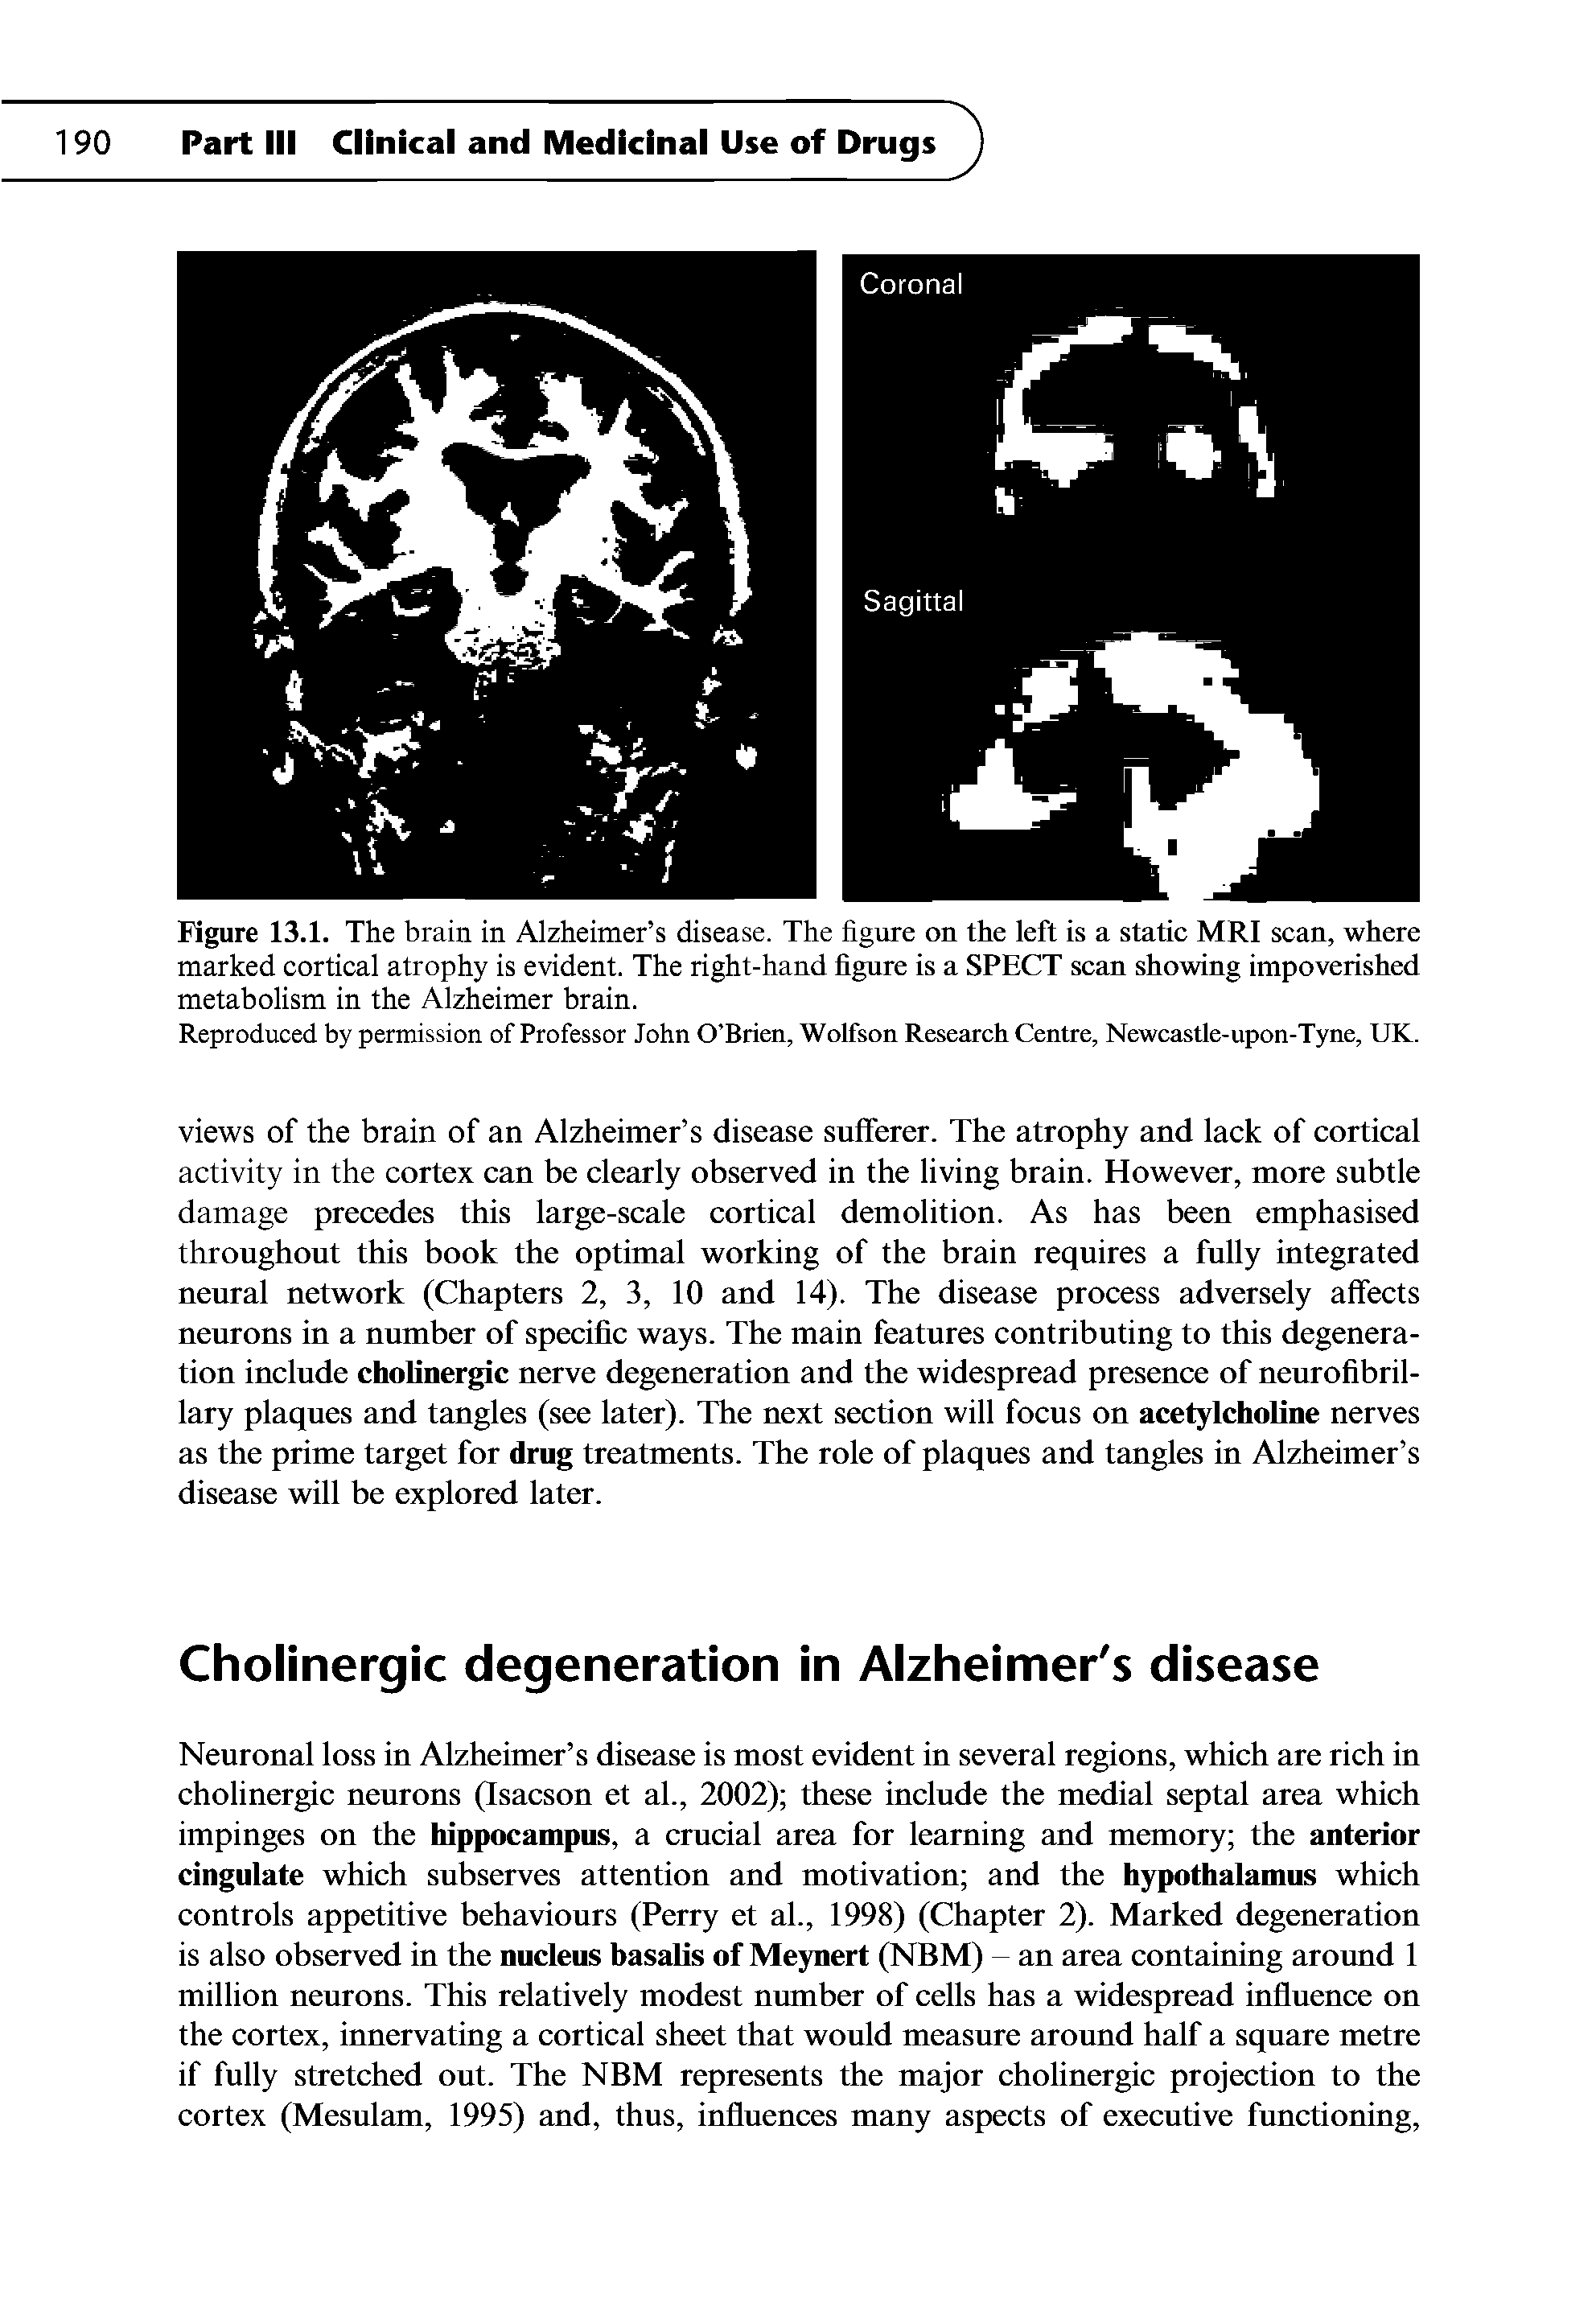 Figure 13.1. The brain in Alzheimer s disease. The figure on the left is a static MRI scan, where marked cortical atrophy is evident. The right-hand figure is a SPECT scan showing impoverished metabolism in the Alzheimer brain.